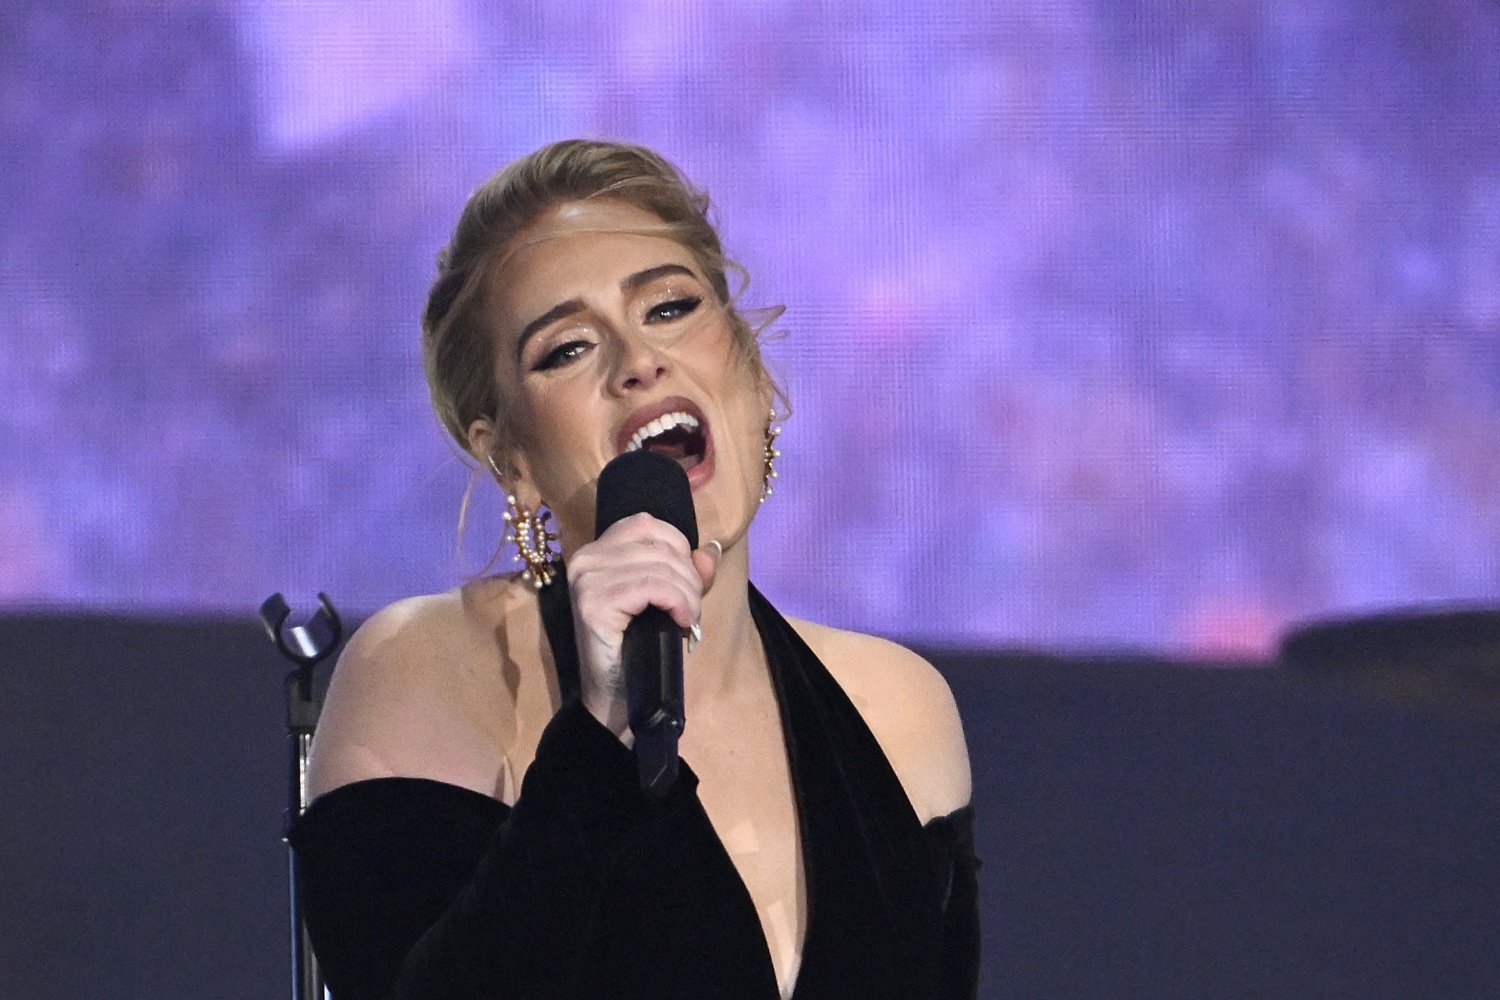 Is Adele Married Already Rumors Increase Following Speech at Las Vegas Show